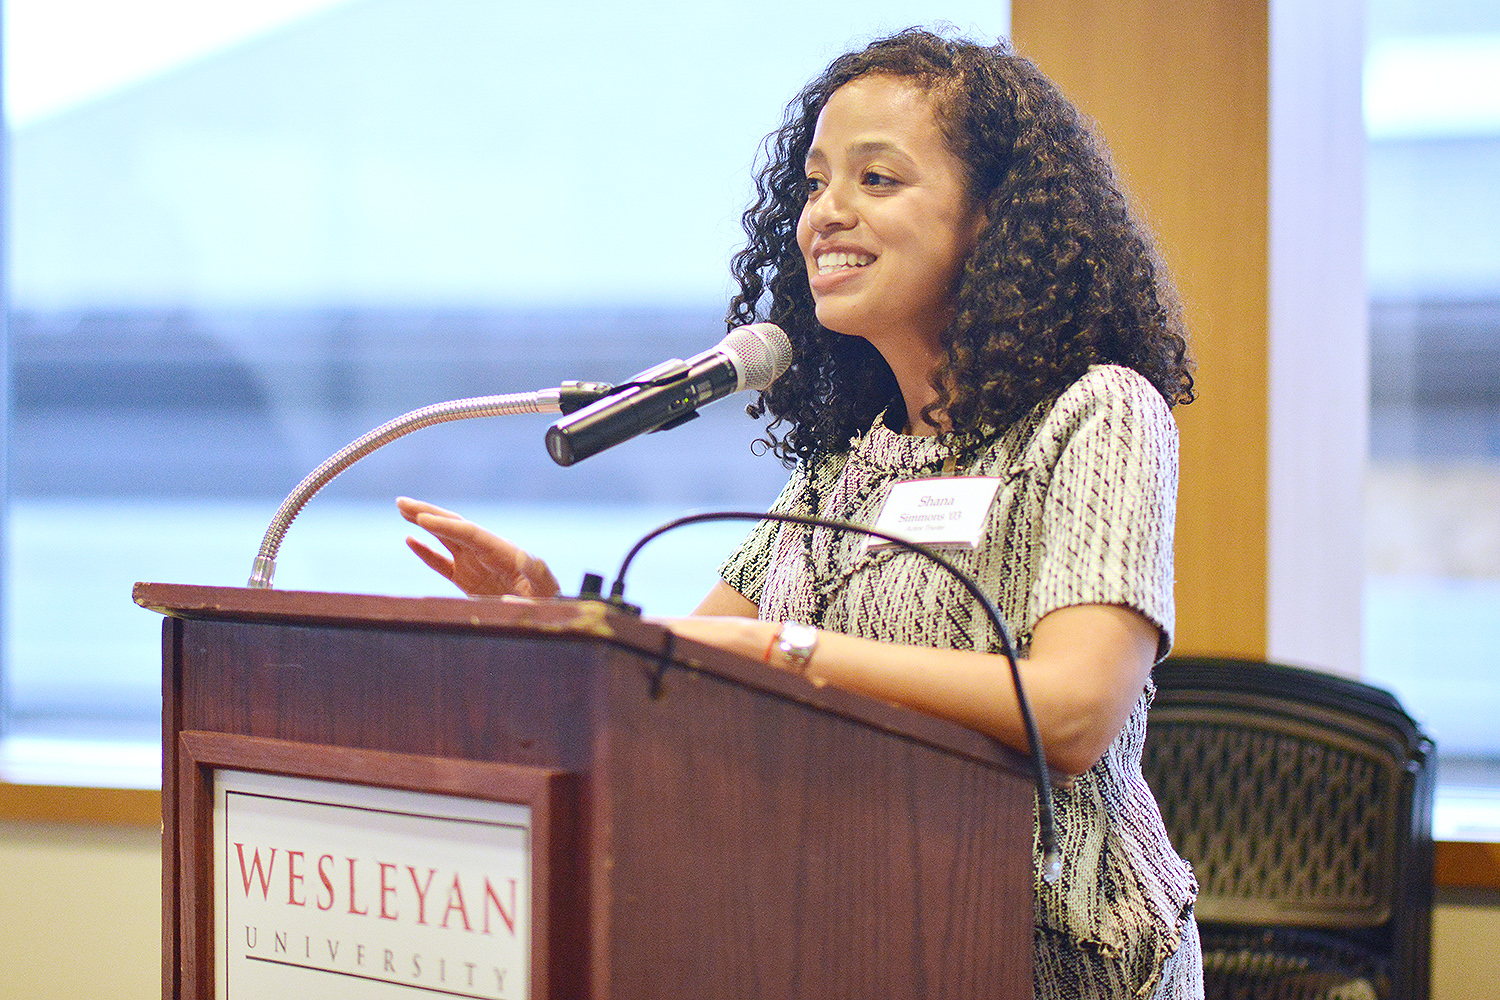 Wesleyan Trustee Shana Simmons '03 provided the keynote discussion during the Student of Color Dinner on April 12. The SOC dinner provides an opportunity for newly admitted students to learn about various Wesleyan affinity groups, organizations and offices on campus that provide student services. 